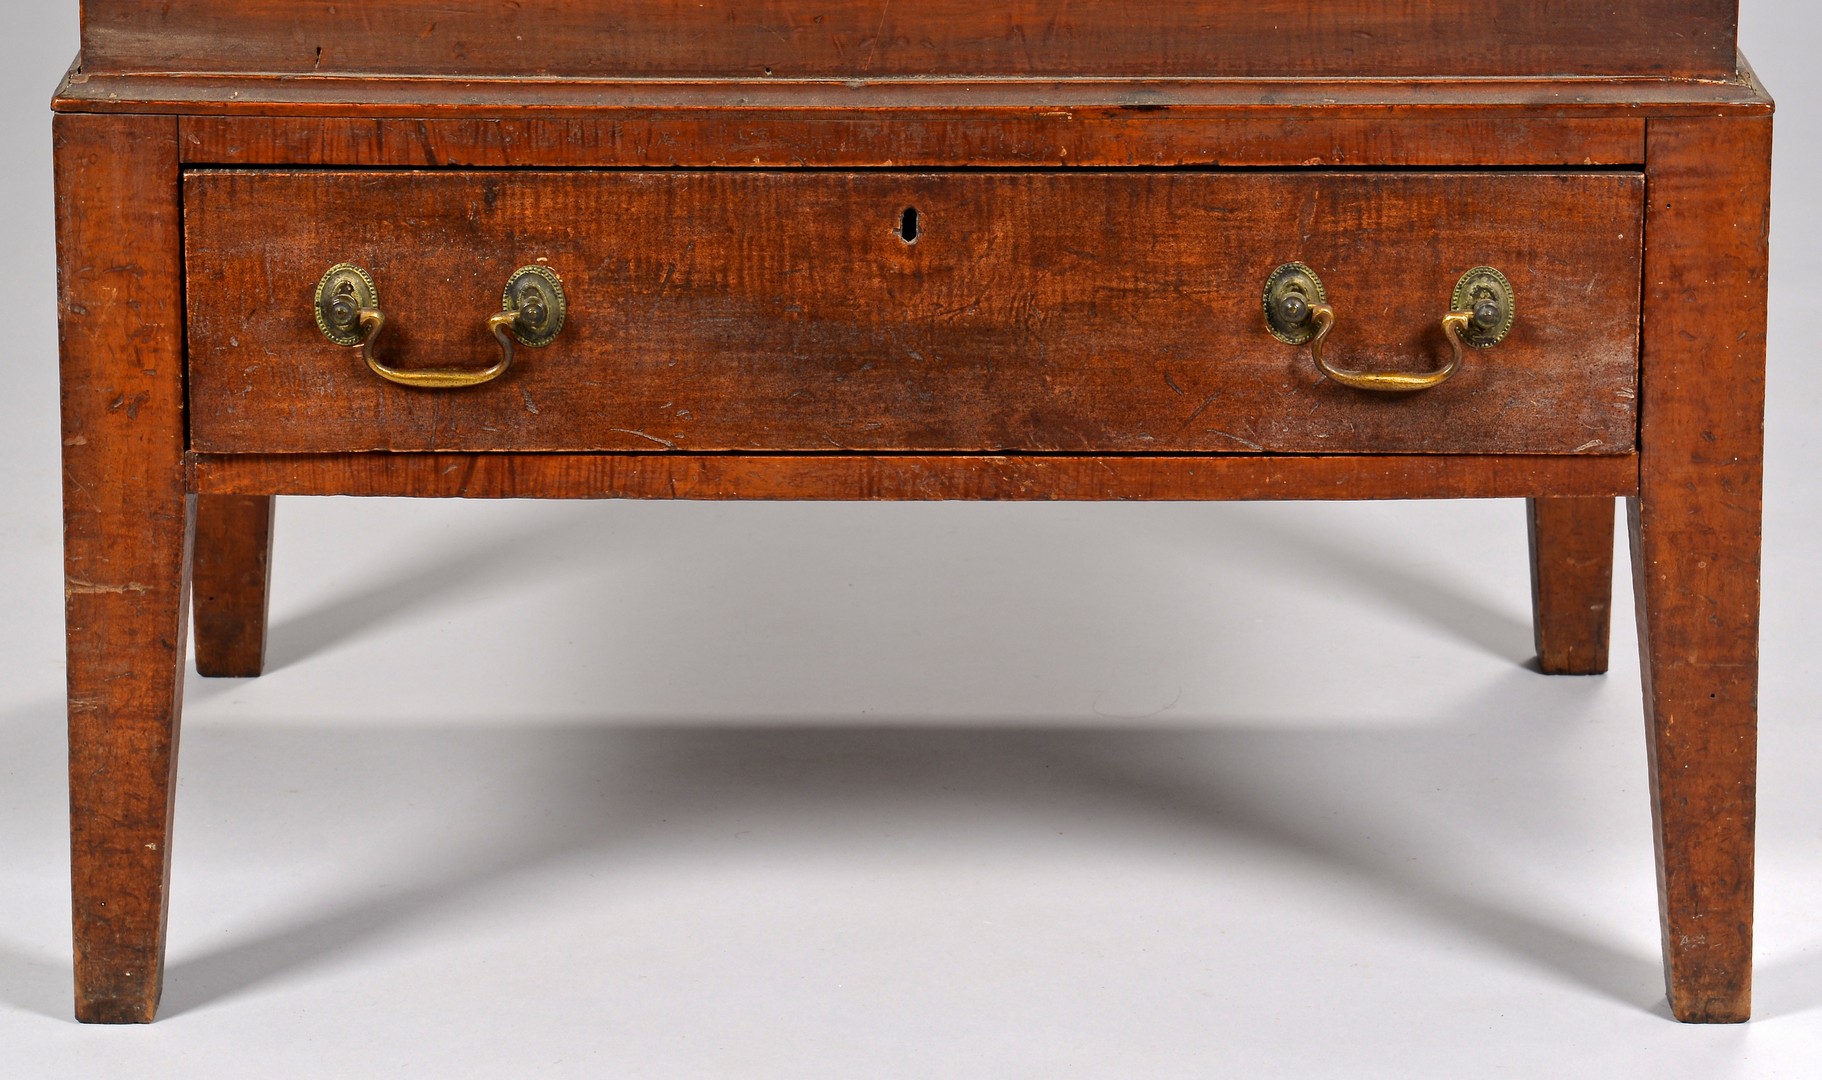 Lot 300: Tiger Maple Sugar Chest, Yellow Pine Secondary